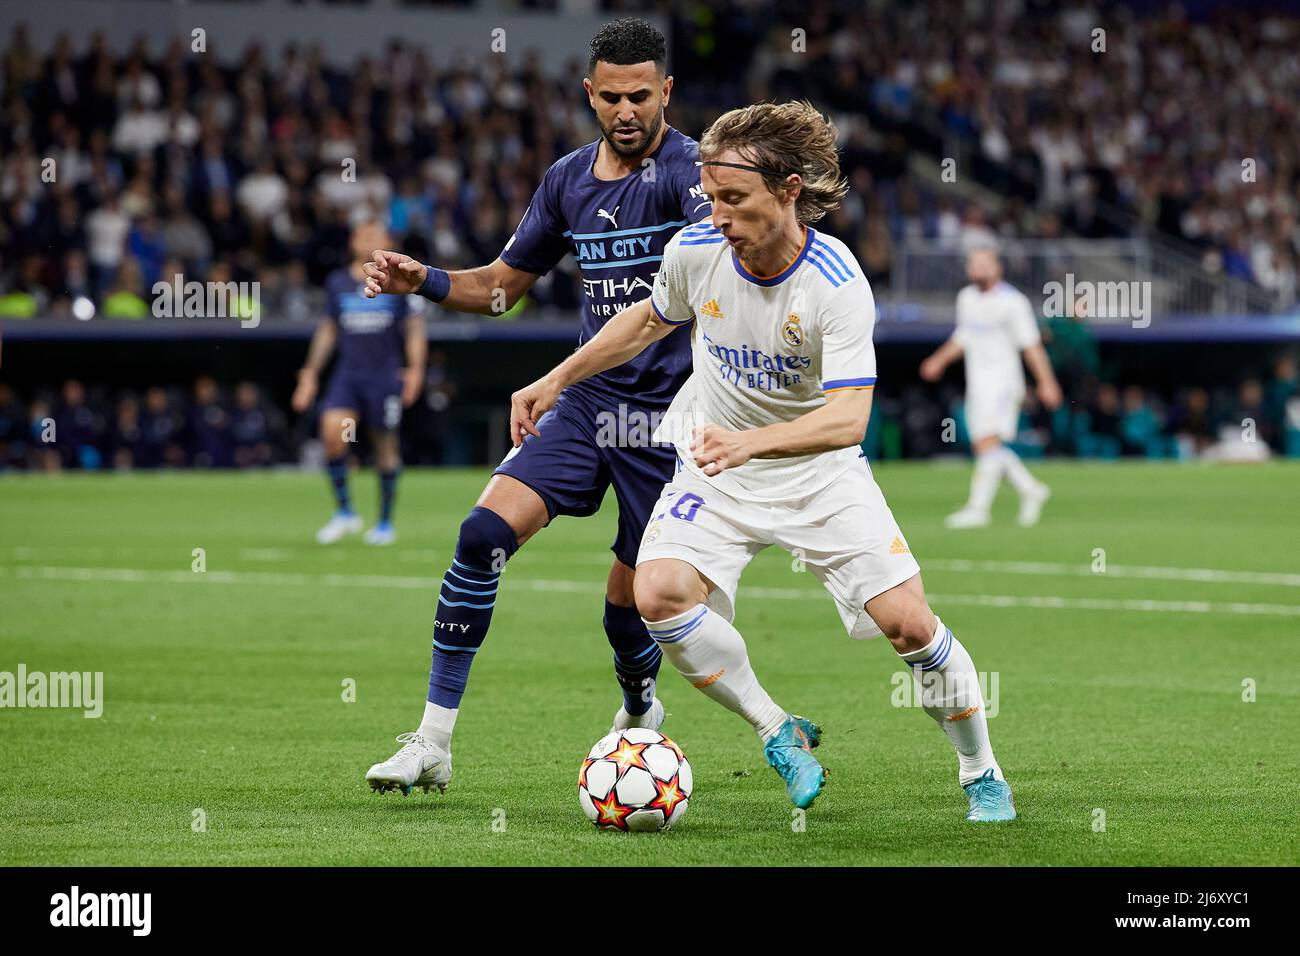 Madrid, Spain. 04th May, 2022. Luka Modric of Real Madrid and Riyad Mahrez of Manchester City during the UEFA Champions League match between Real Madrid and Mancheaster City played at Santiago Bernabeu Stadium on May 4, 2021 in Madrid Spain. (Photo by Ruben Albarran/PRESSINPHOTO) Credit: PRESSINPHOTO SPORTS AGENCY/Alamy Live News Stock Photo